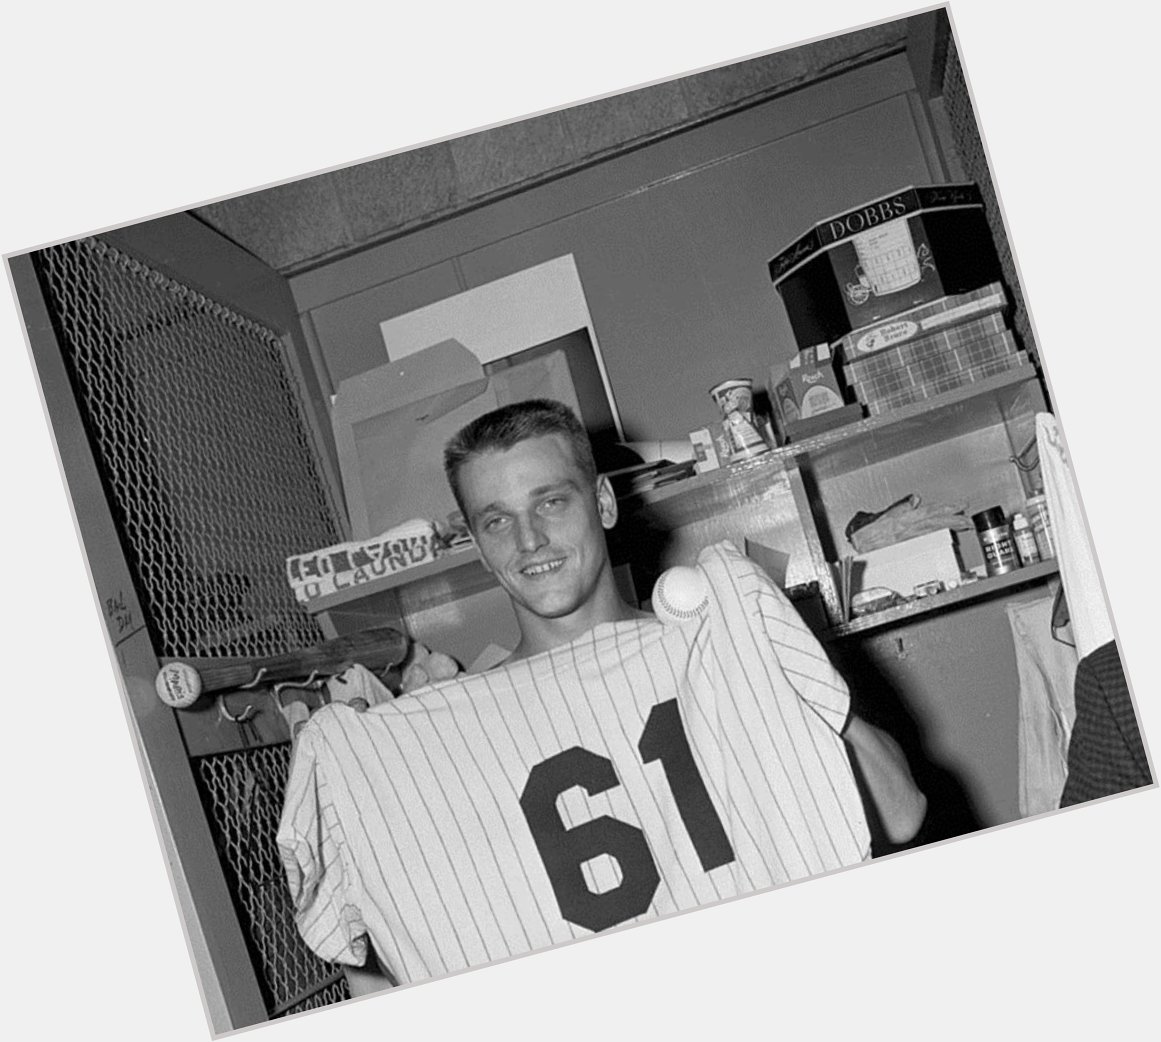 Happy birthday to the great Roger Maris 